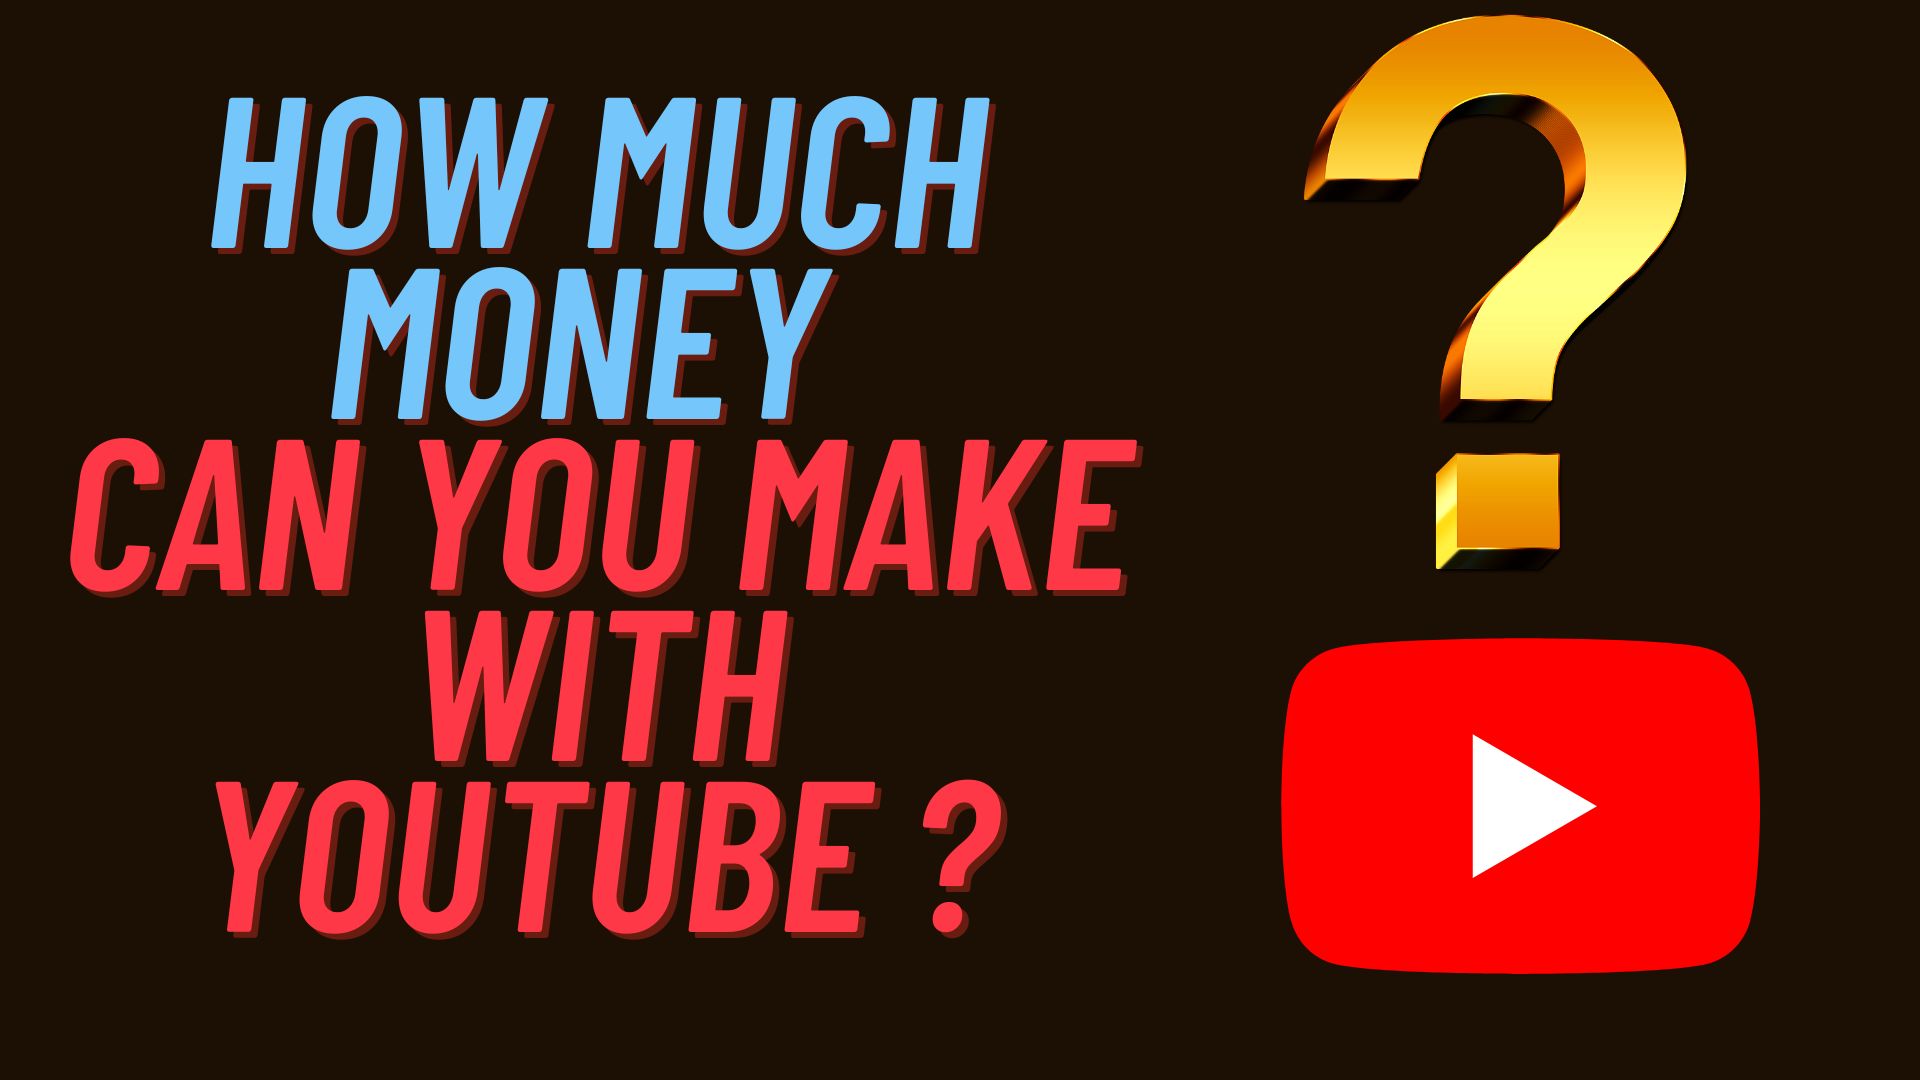 HOW MUCH MONEY CAN YOU MAKE WITH YOUTUBE?